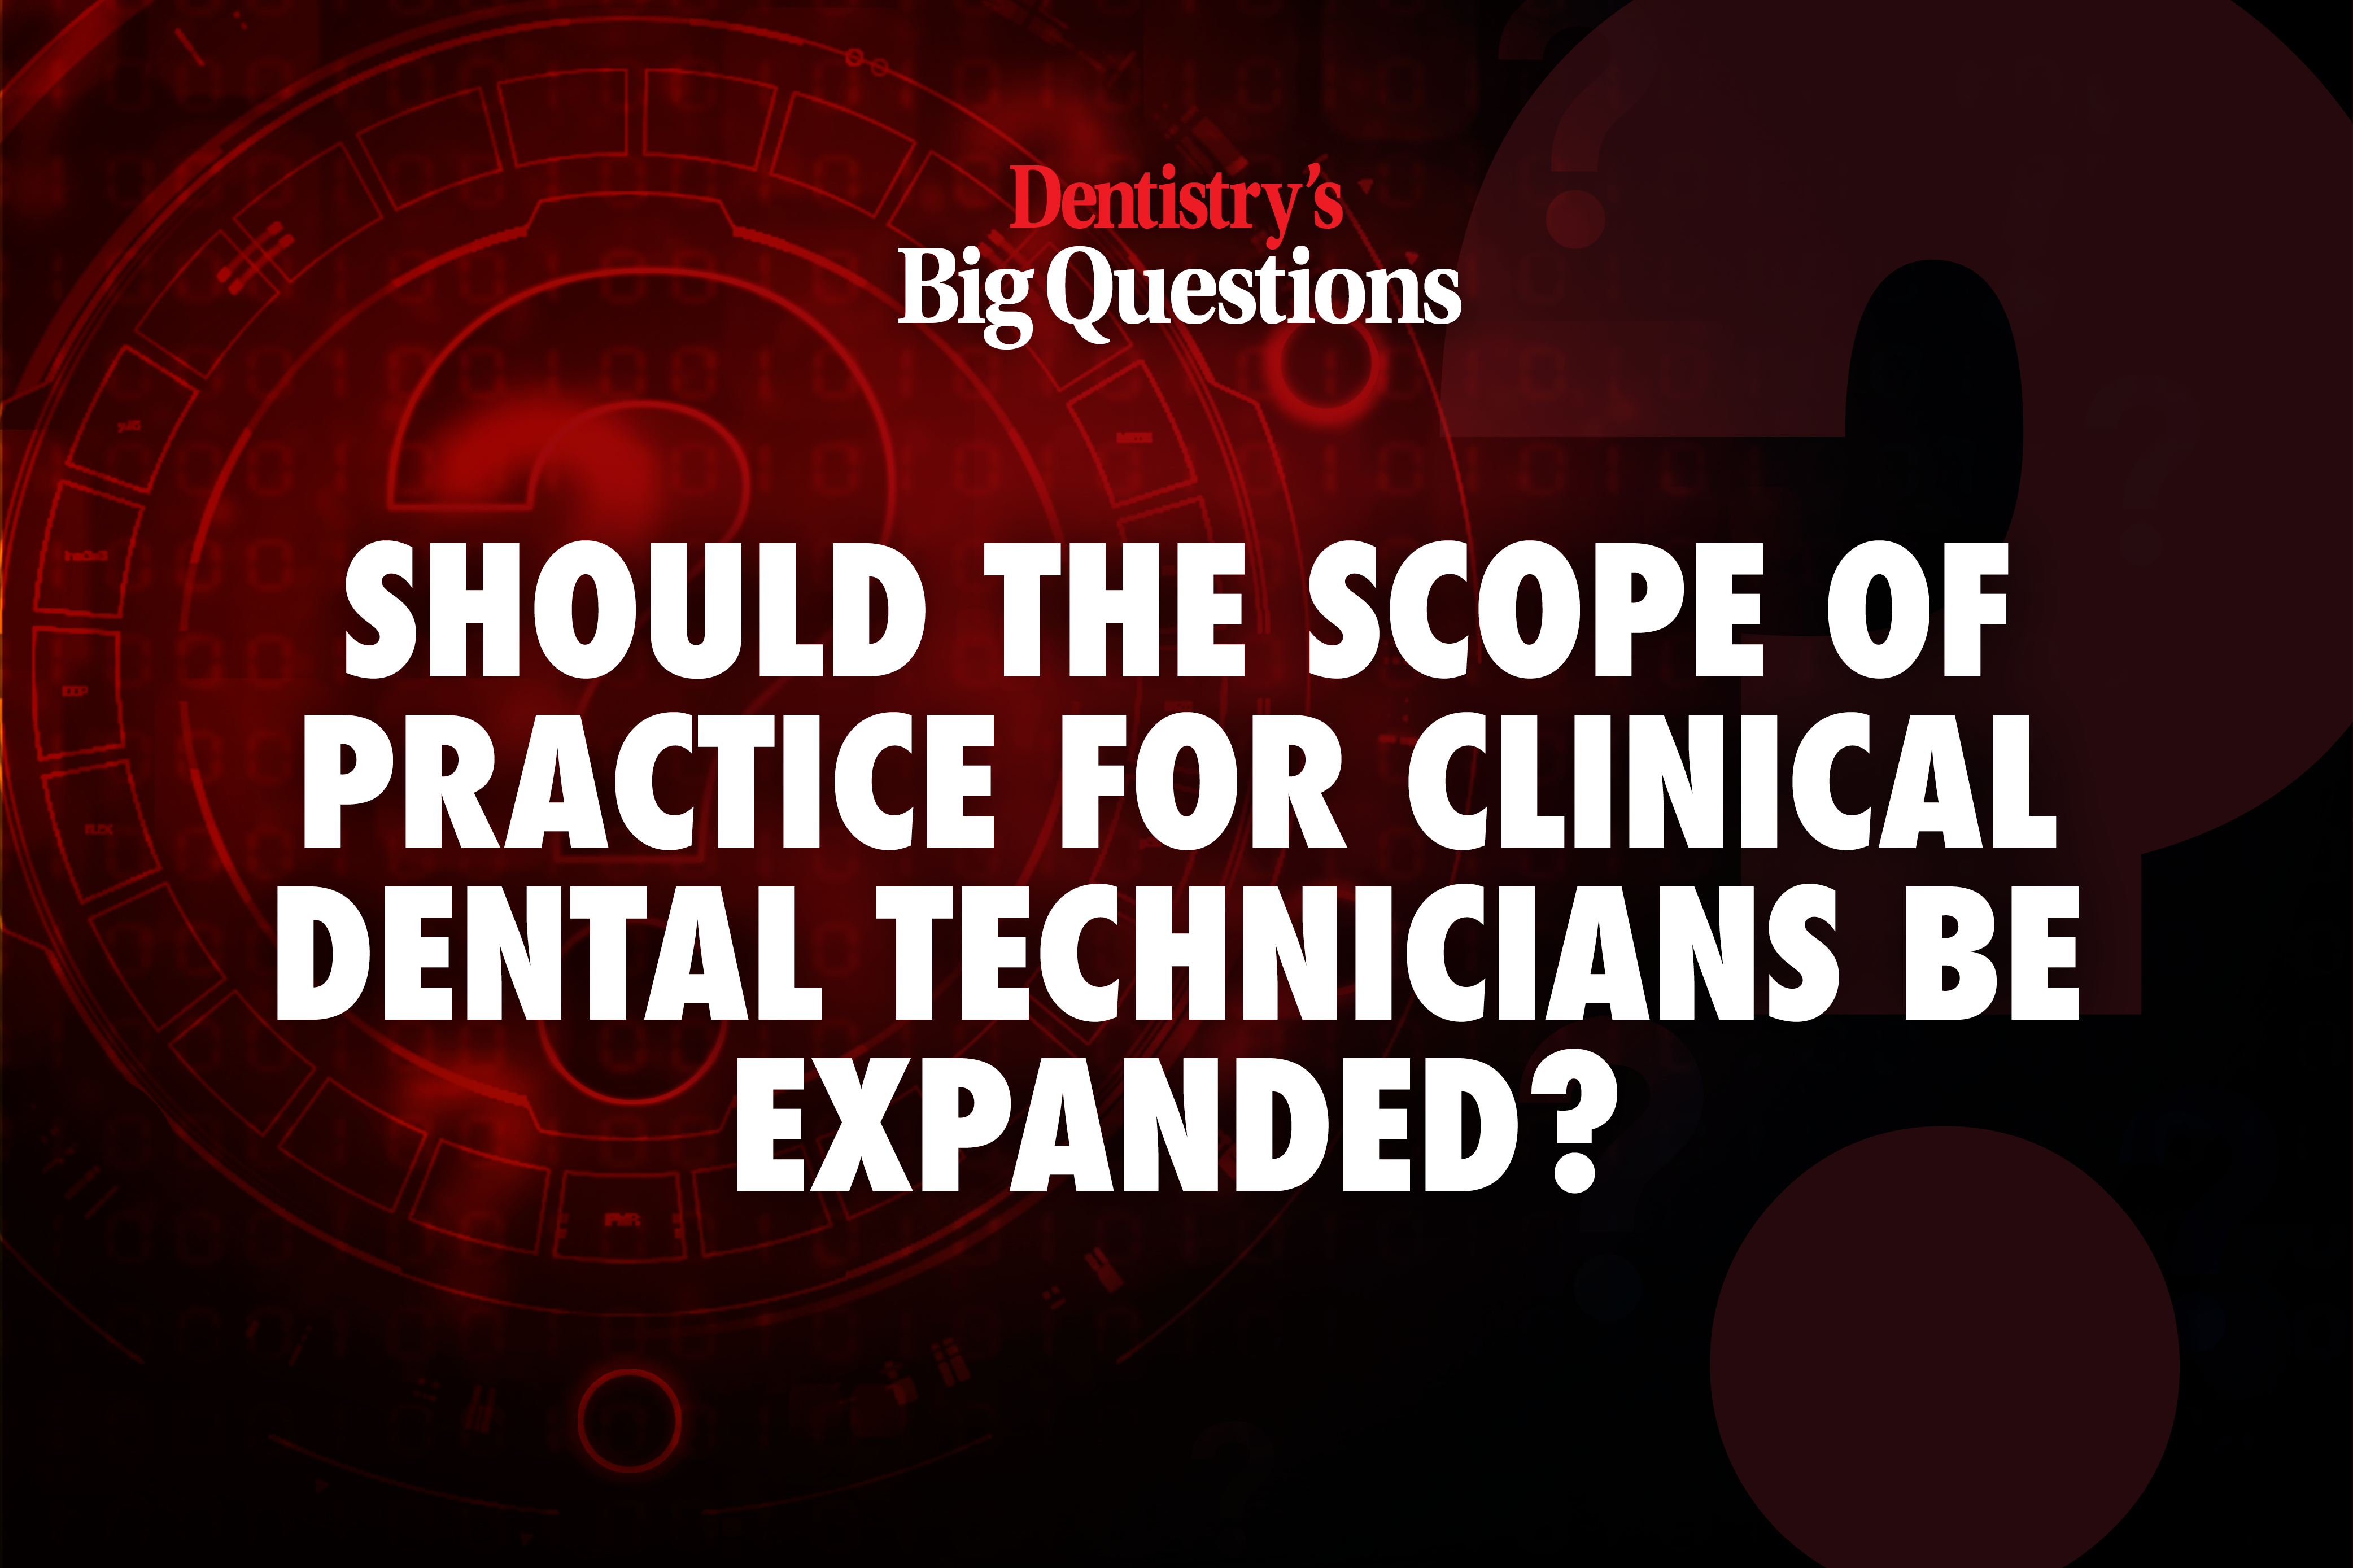 Last week, we asked the profession if the scope of practice for clinical dental technicians should be expanded – here's what was said...